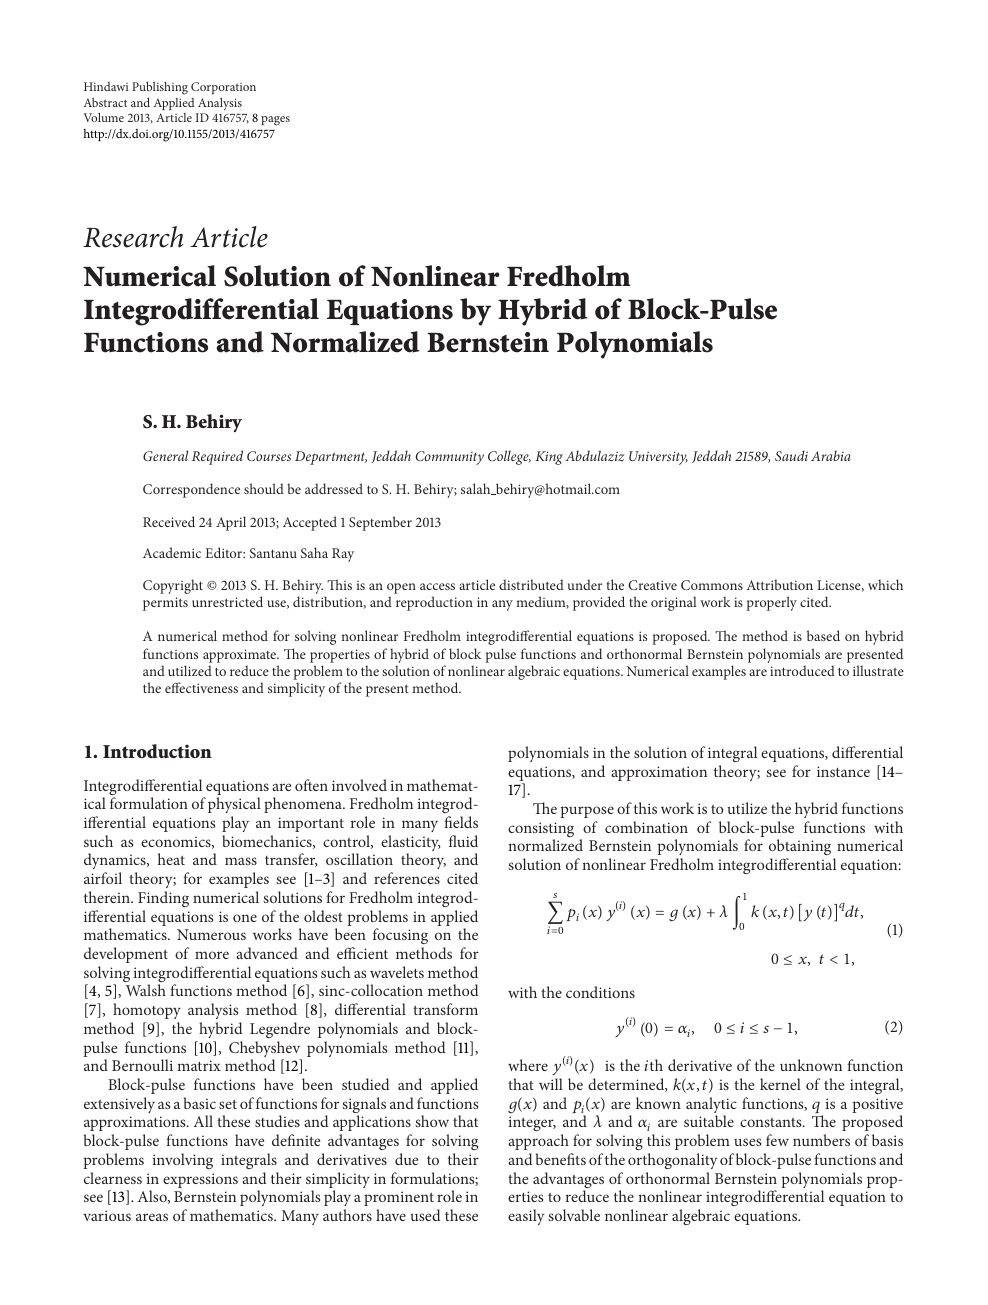 Numerical Solution Of Nonlinear Fredholm Integrodifferential Equations By Hybrid Of Block Pulse Functions And Normalized Bernstein Polynomials Topic Of Research Paper In Mathematics Download Scholarly Article Pdf And Read For Free On